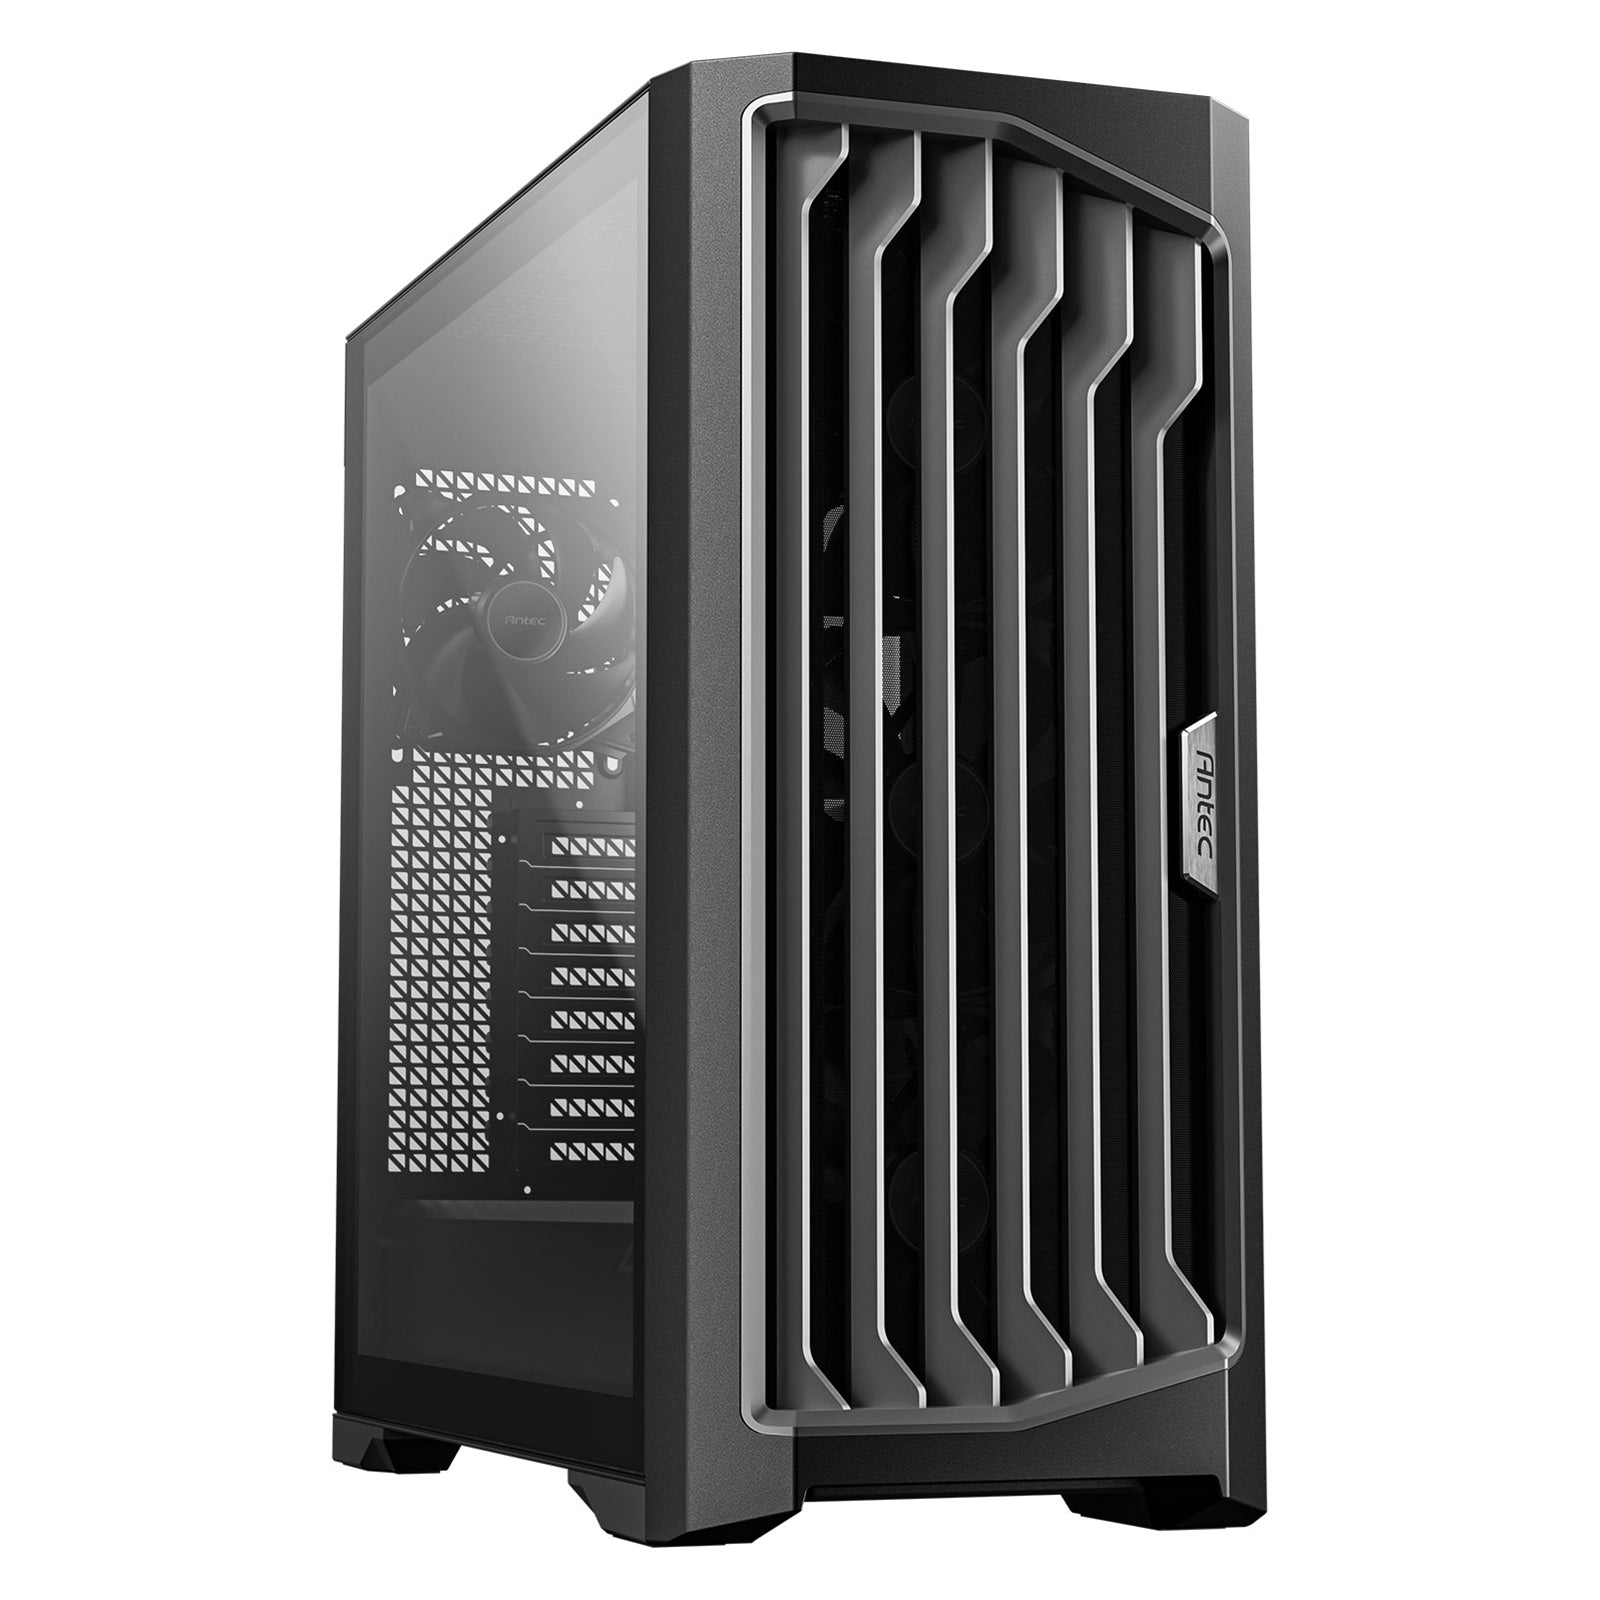 ANTEC Performance 1 E-ATX Full Tower Case - Ultimate Cooling & Cable Management